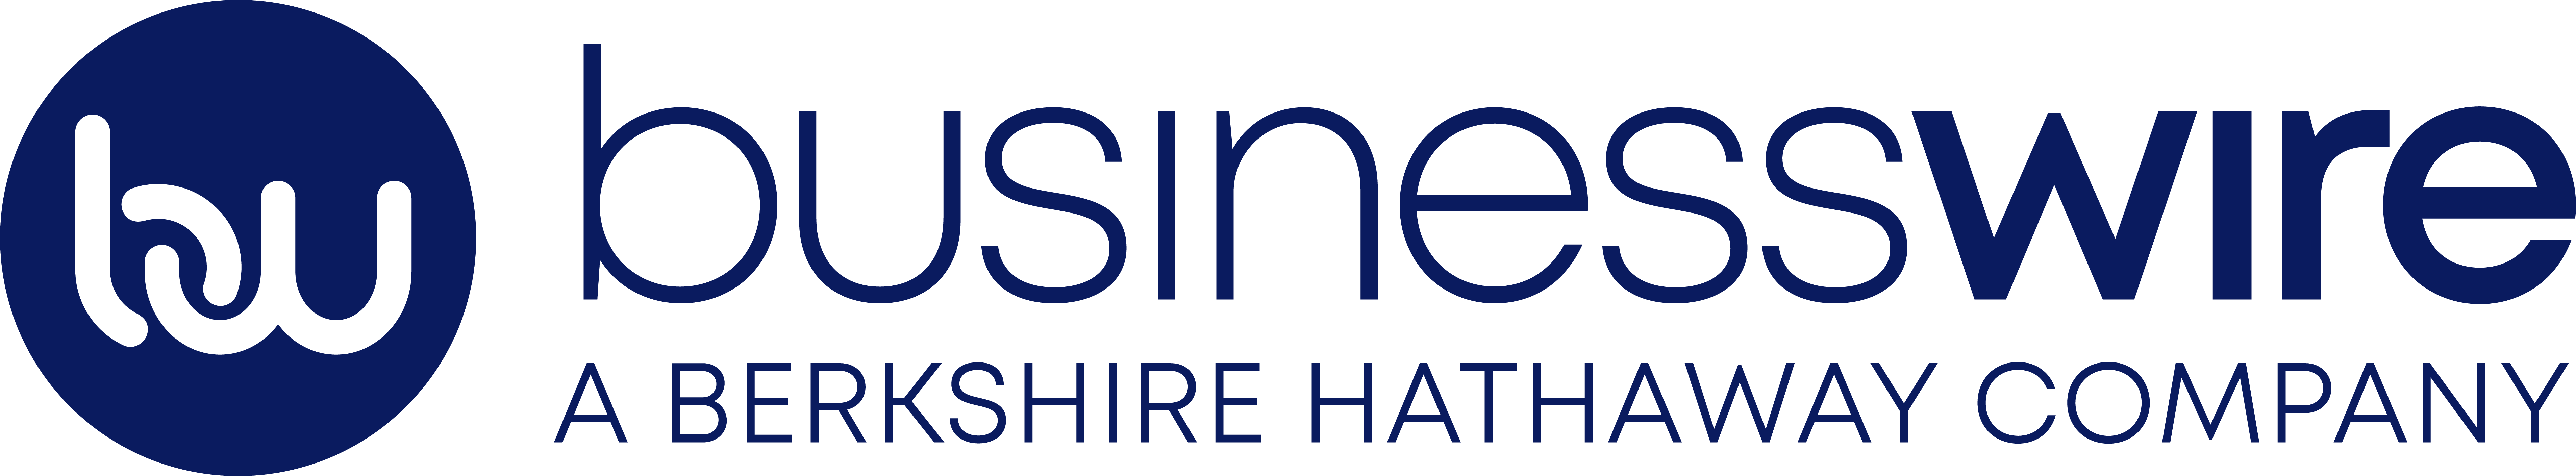 Business Wire Logo Small Navy Success Stories